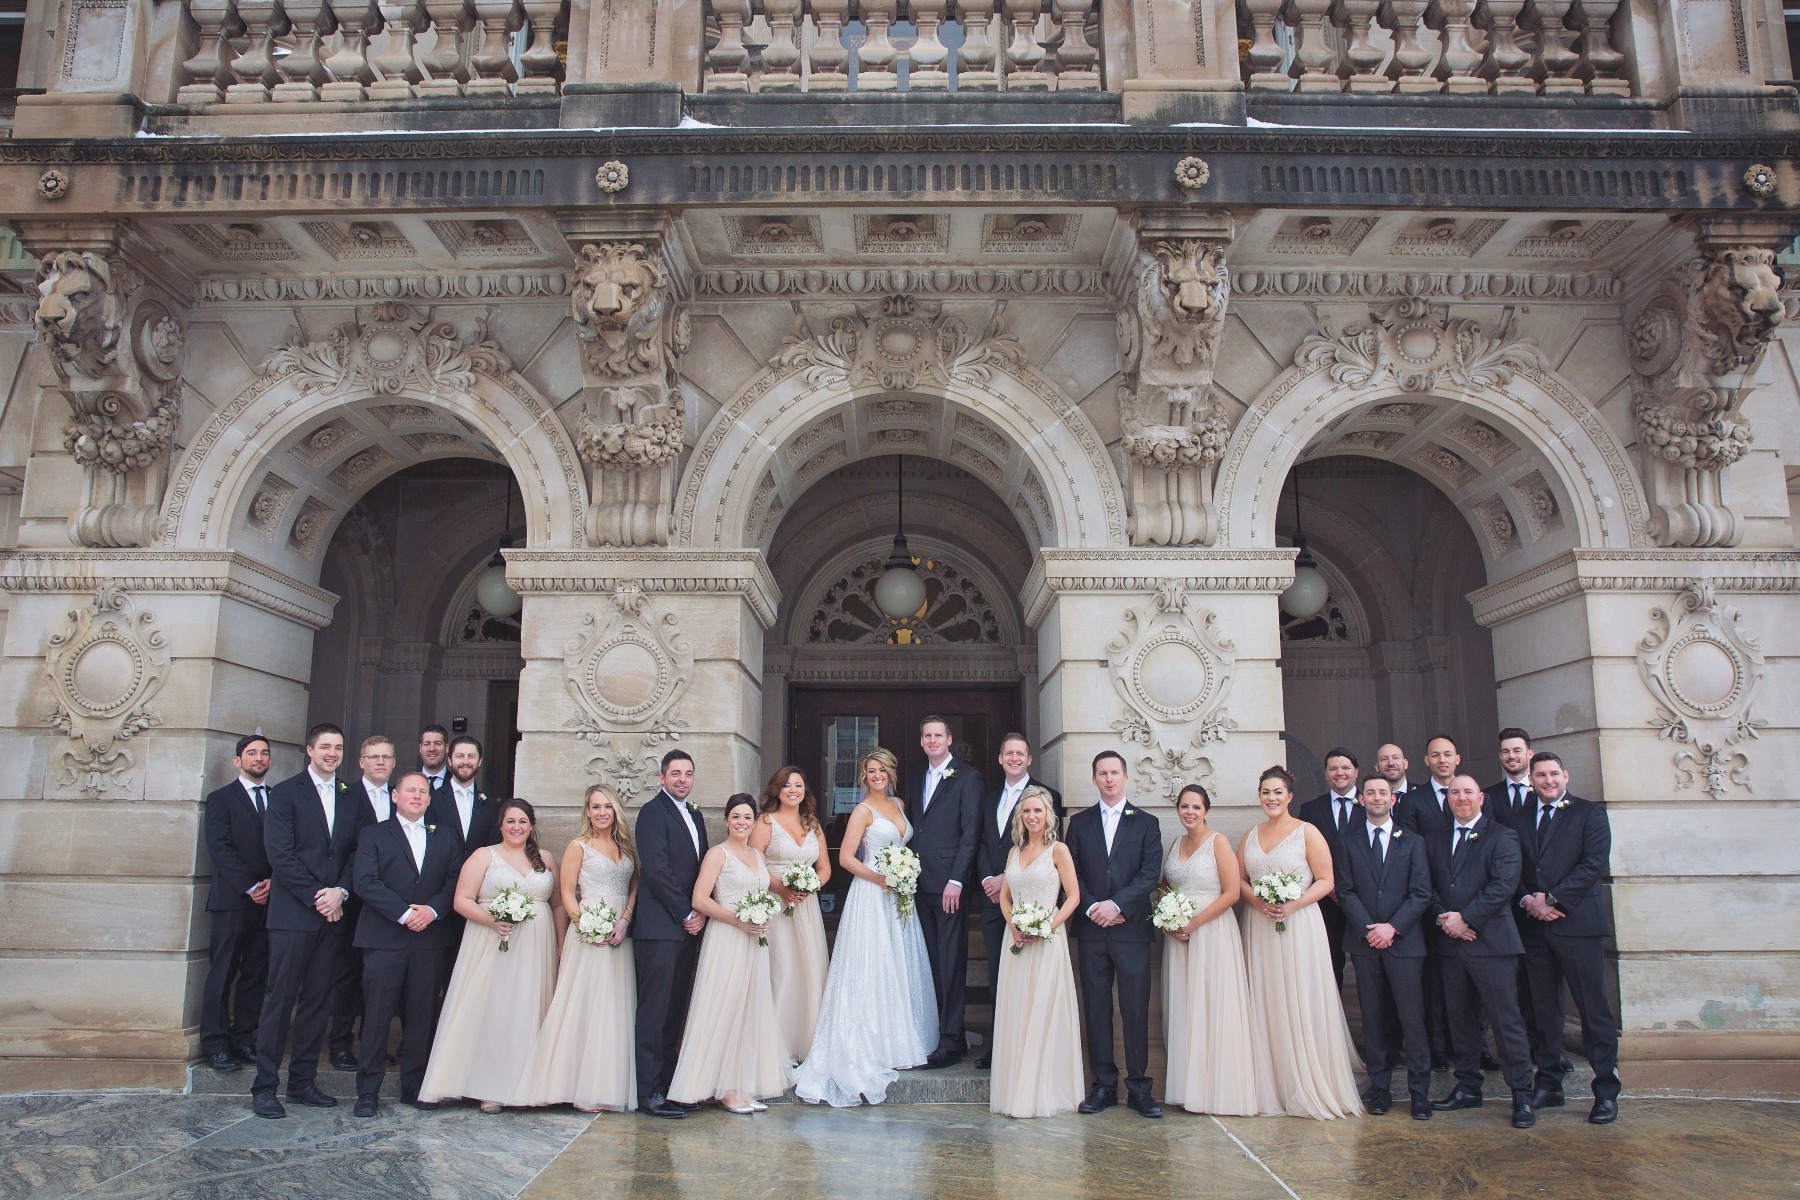 bride & groom pose with their large wedding party in front of a stone arched building